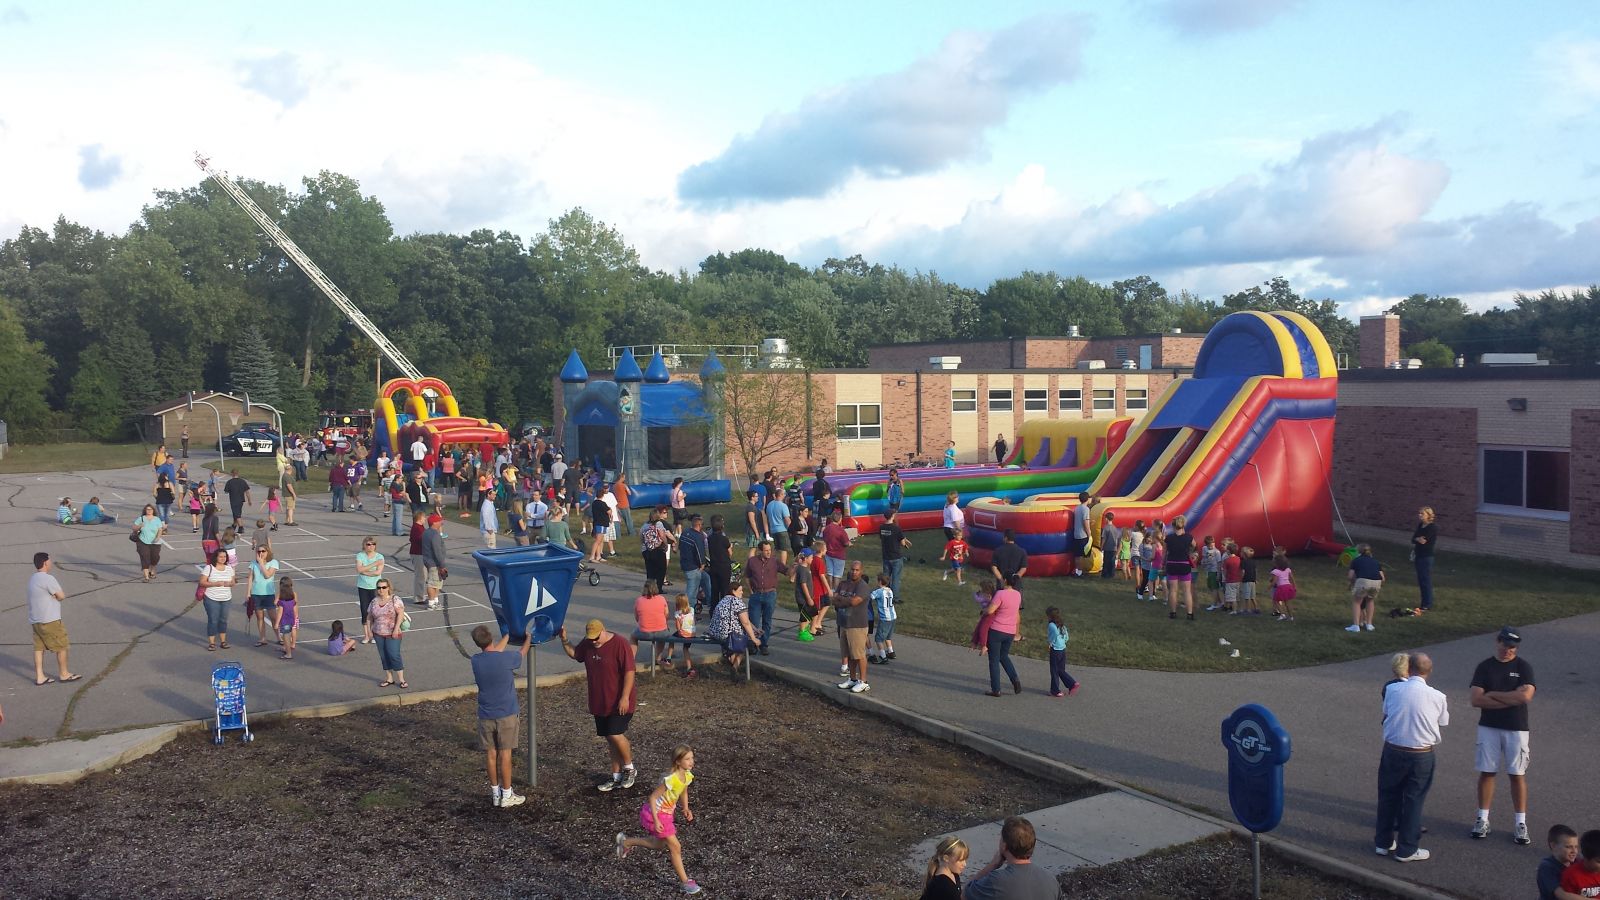 School carnival with Laughs A Lot bounce house, slide, obstacle course, and other inflatables